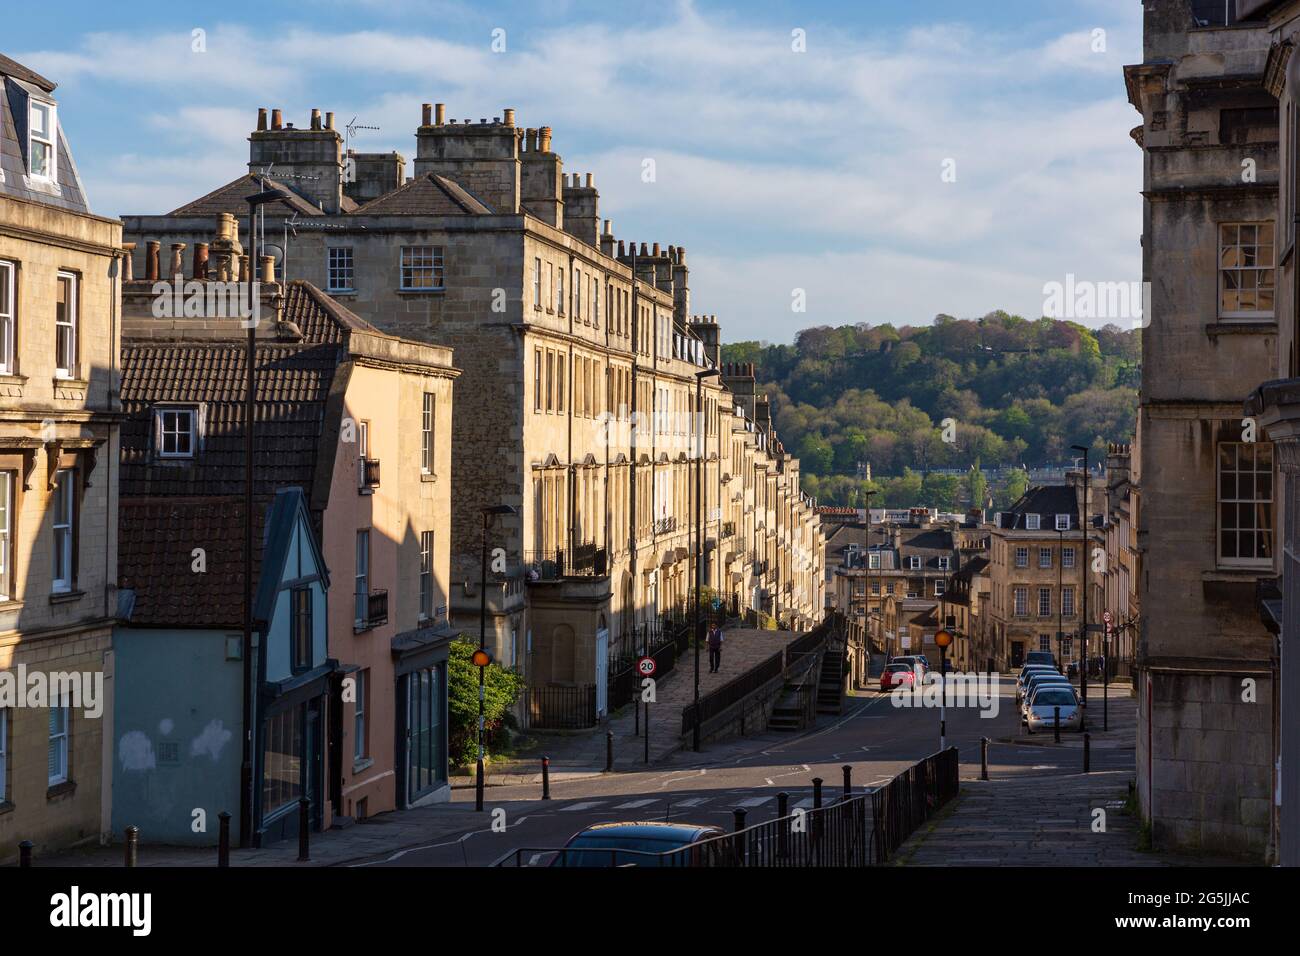 View down Lansdown Road on a quiet, sunny day. Alexandra Park and Beechen Cliff can be seen in the background. Stock Photo